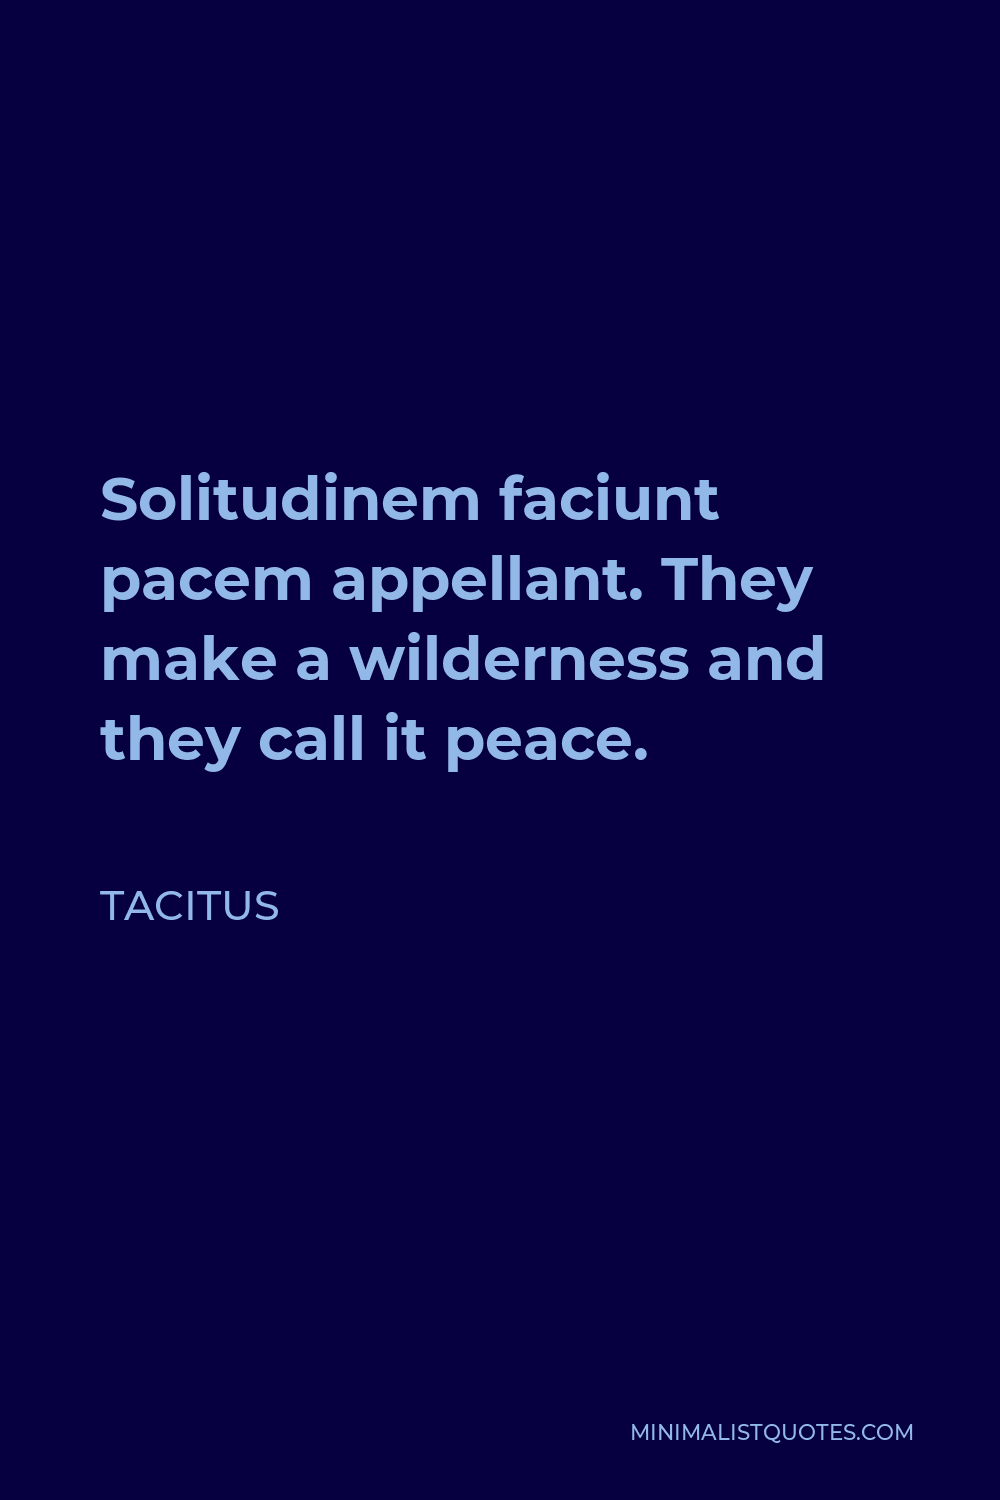 Tacitus Quote - Solitudinem faciunt pacem appellant. They make a wilderness and they call it peace.